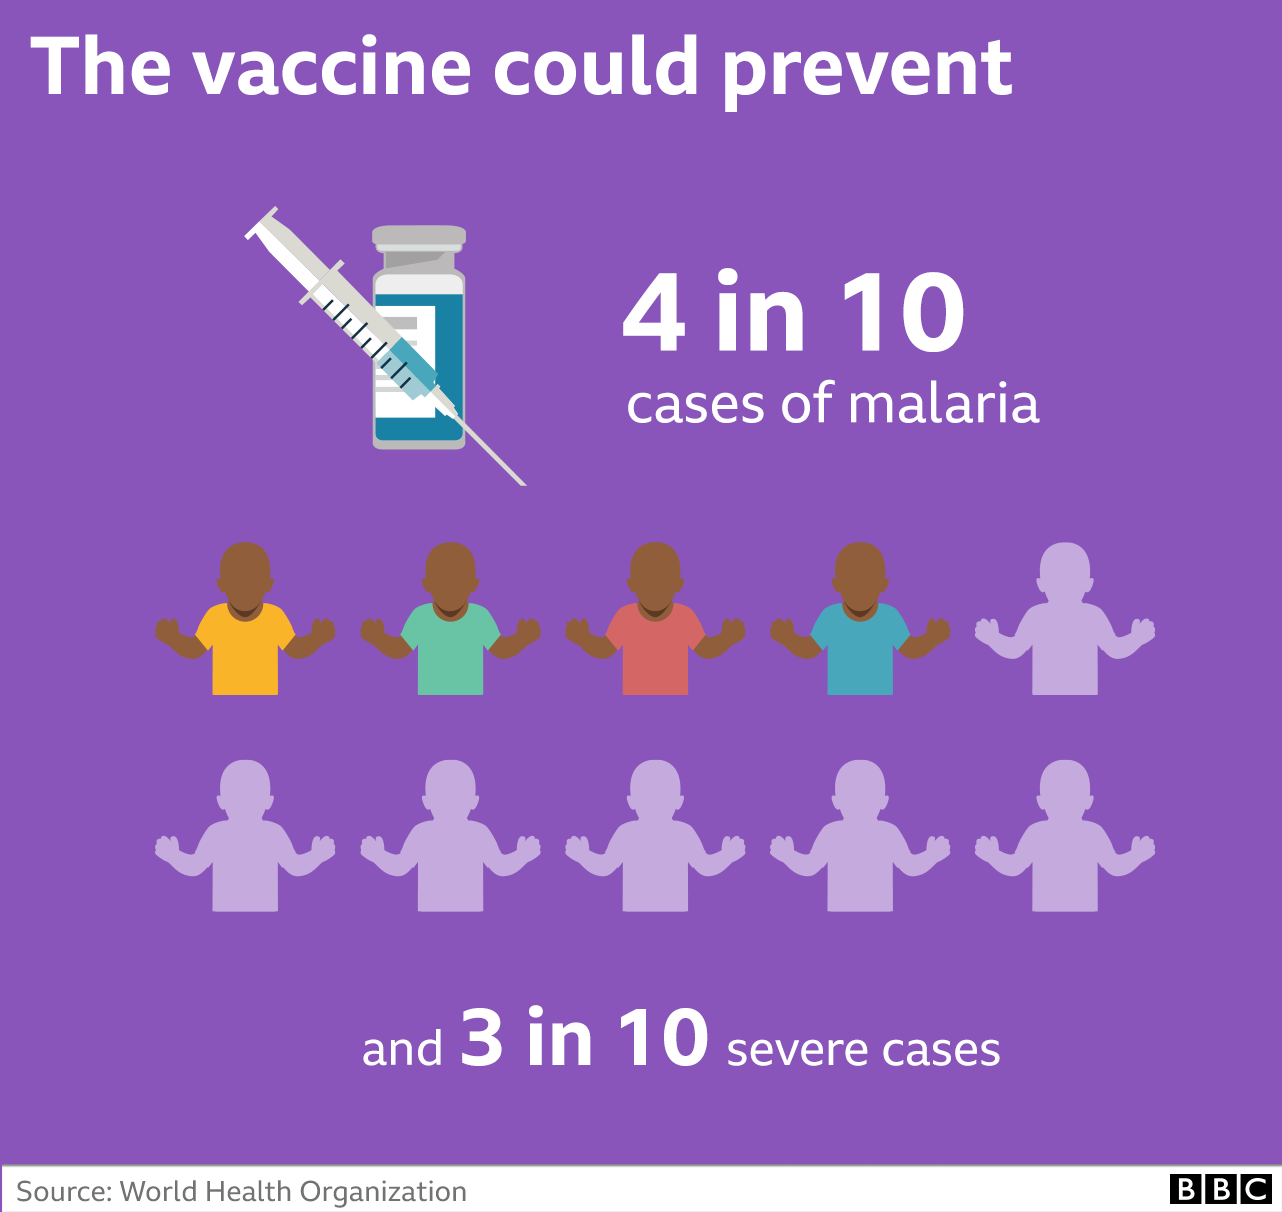 The vaccine could prevent 4 in 10 cases of malaria